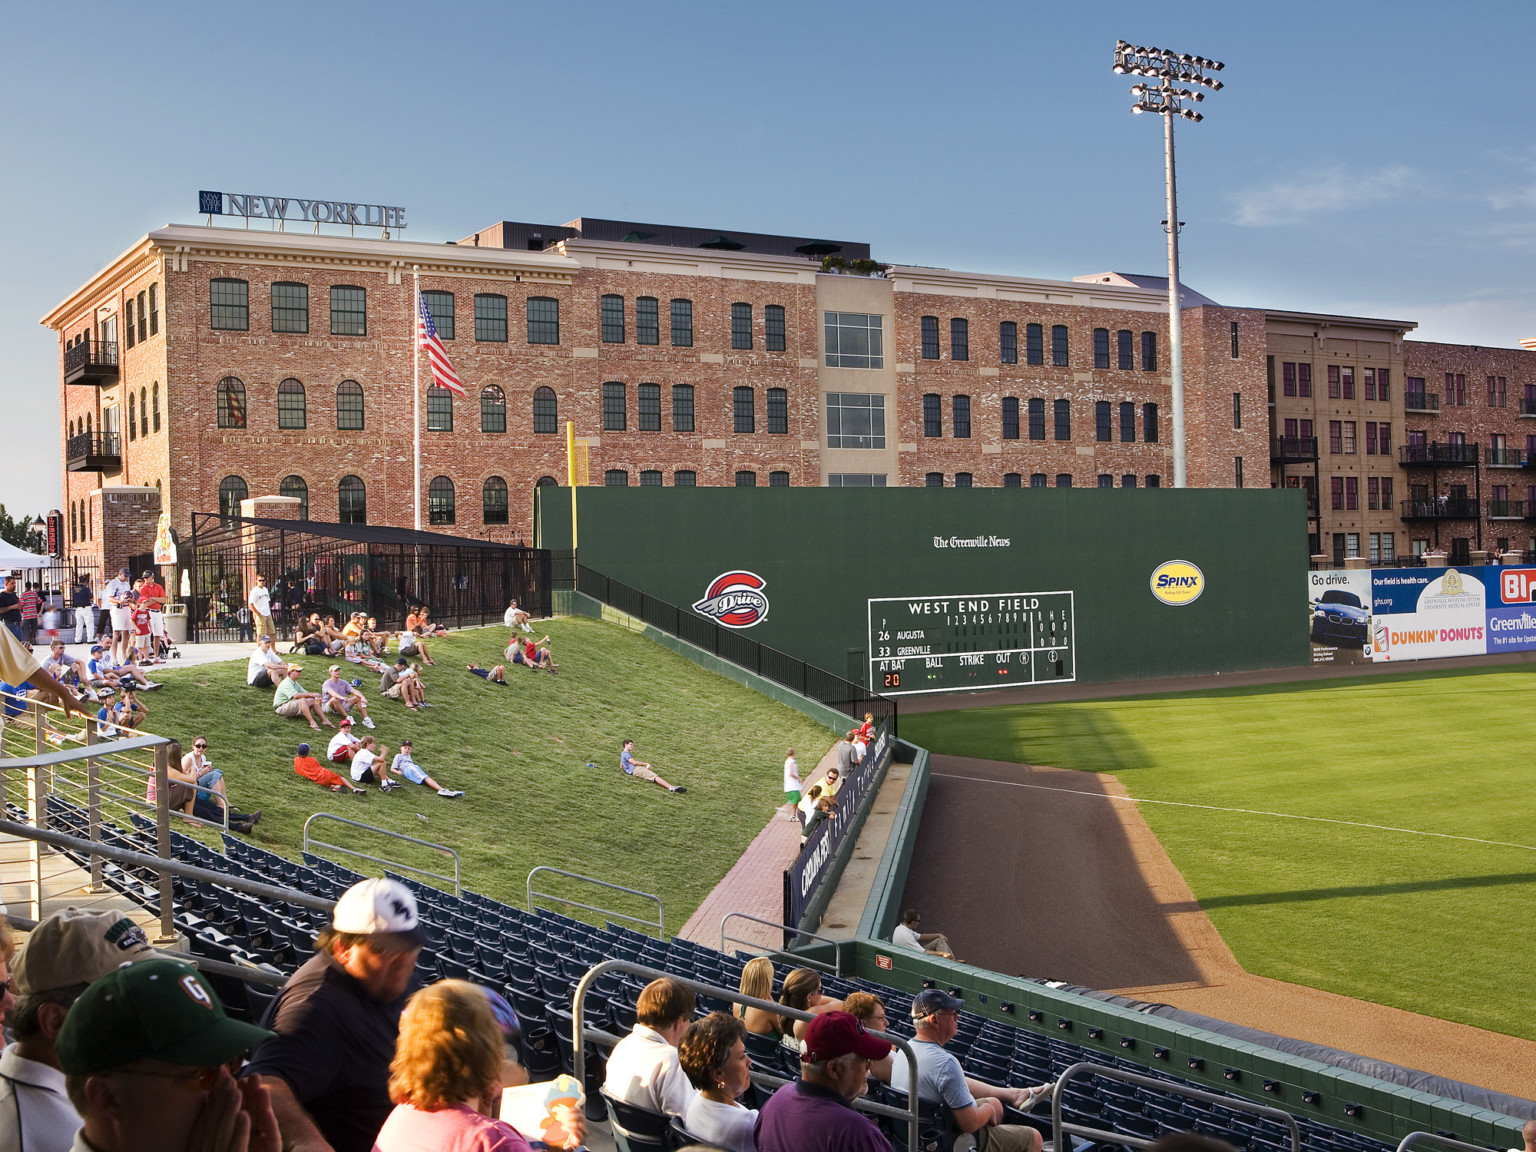 Lawn seating on sloped hill beyond third base foul line. Right, a green wall with score board in front of a brick building